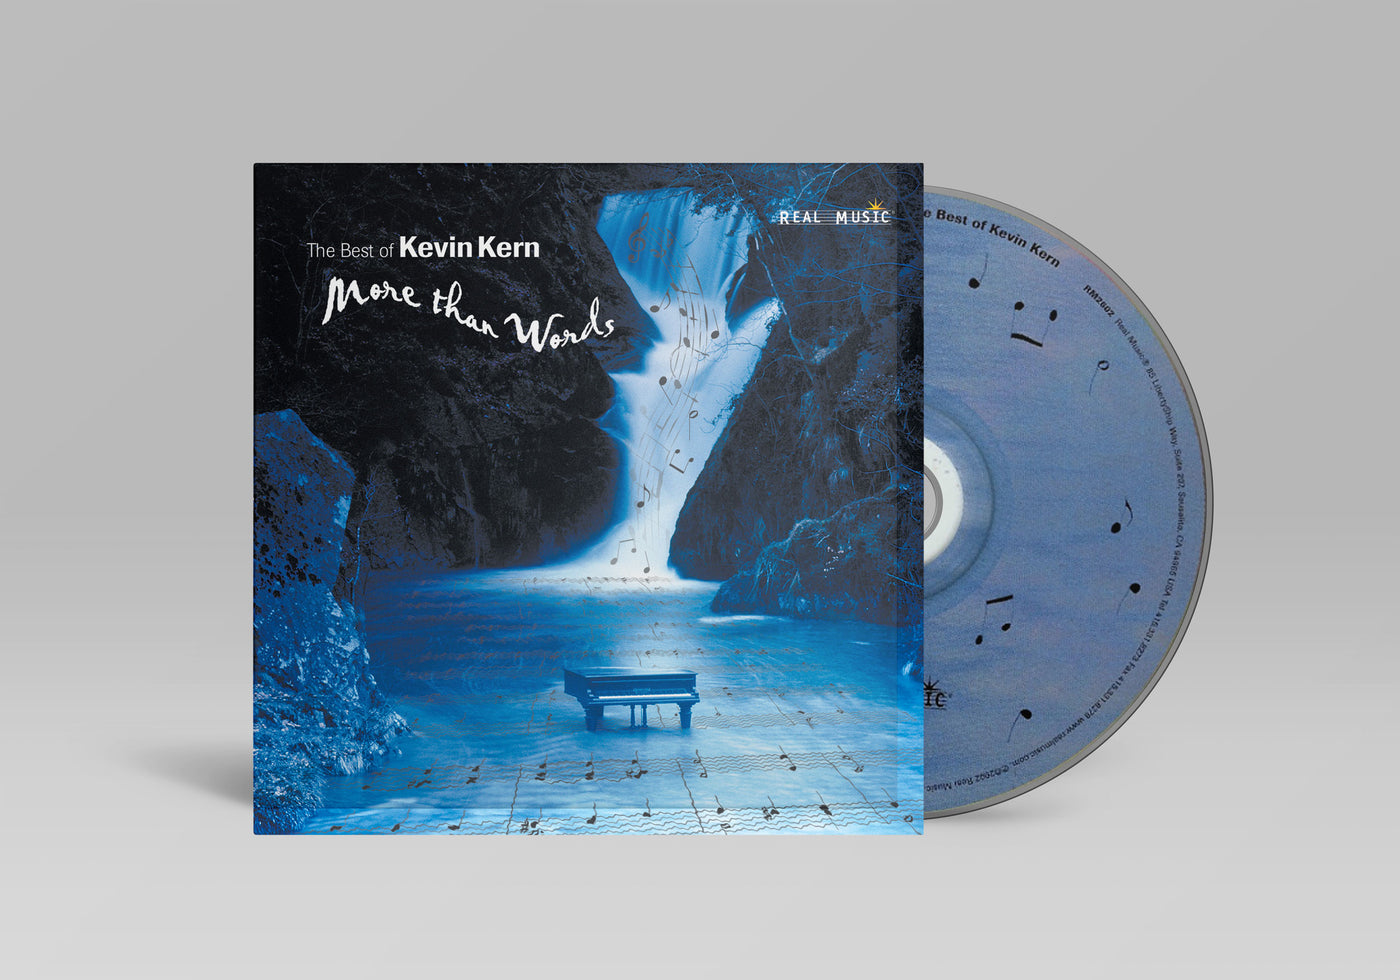 More Than Words: the Best of Kevin Kern, cd and cover.